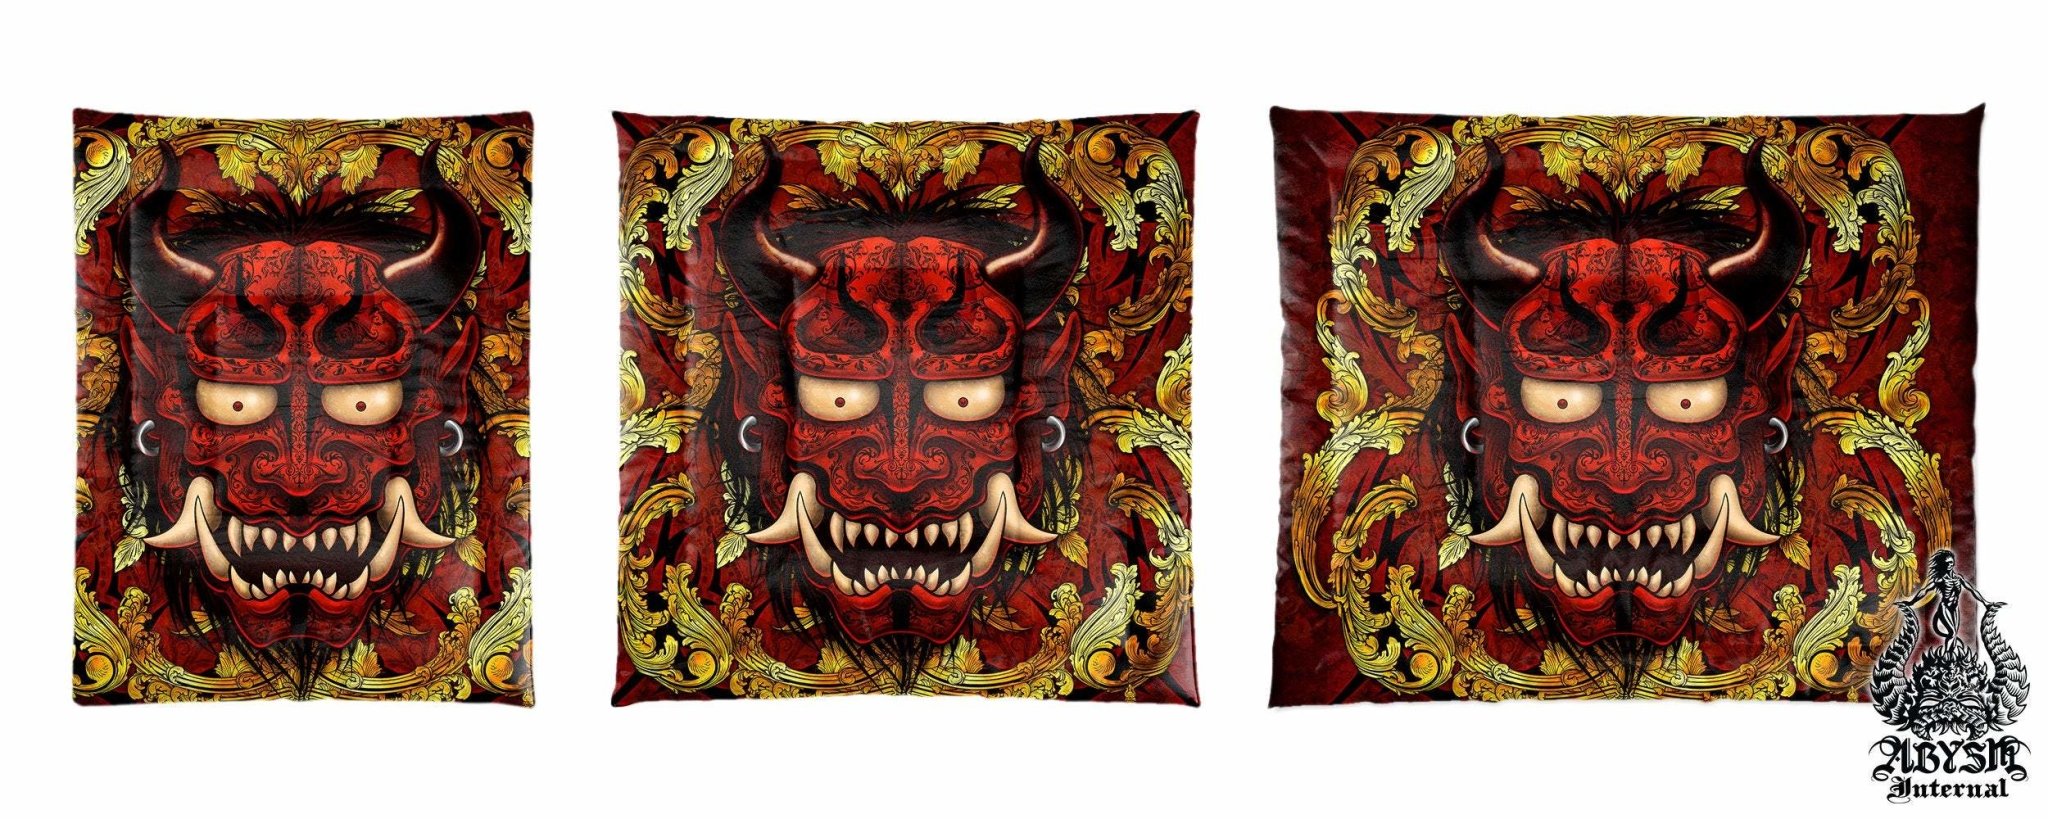 Oni Bedding Set, Comforter and Duvet, Anime Bed Cover and Bedroom Decor, King, Queen and Twin Size - Gold and Red, Japanese Demon - Abysm Internal